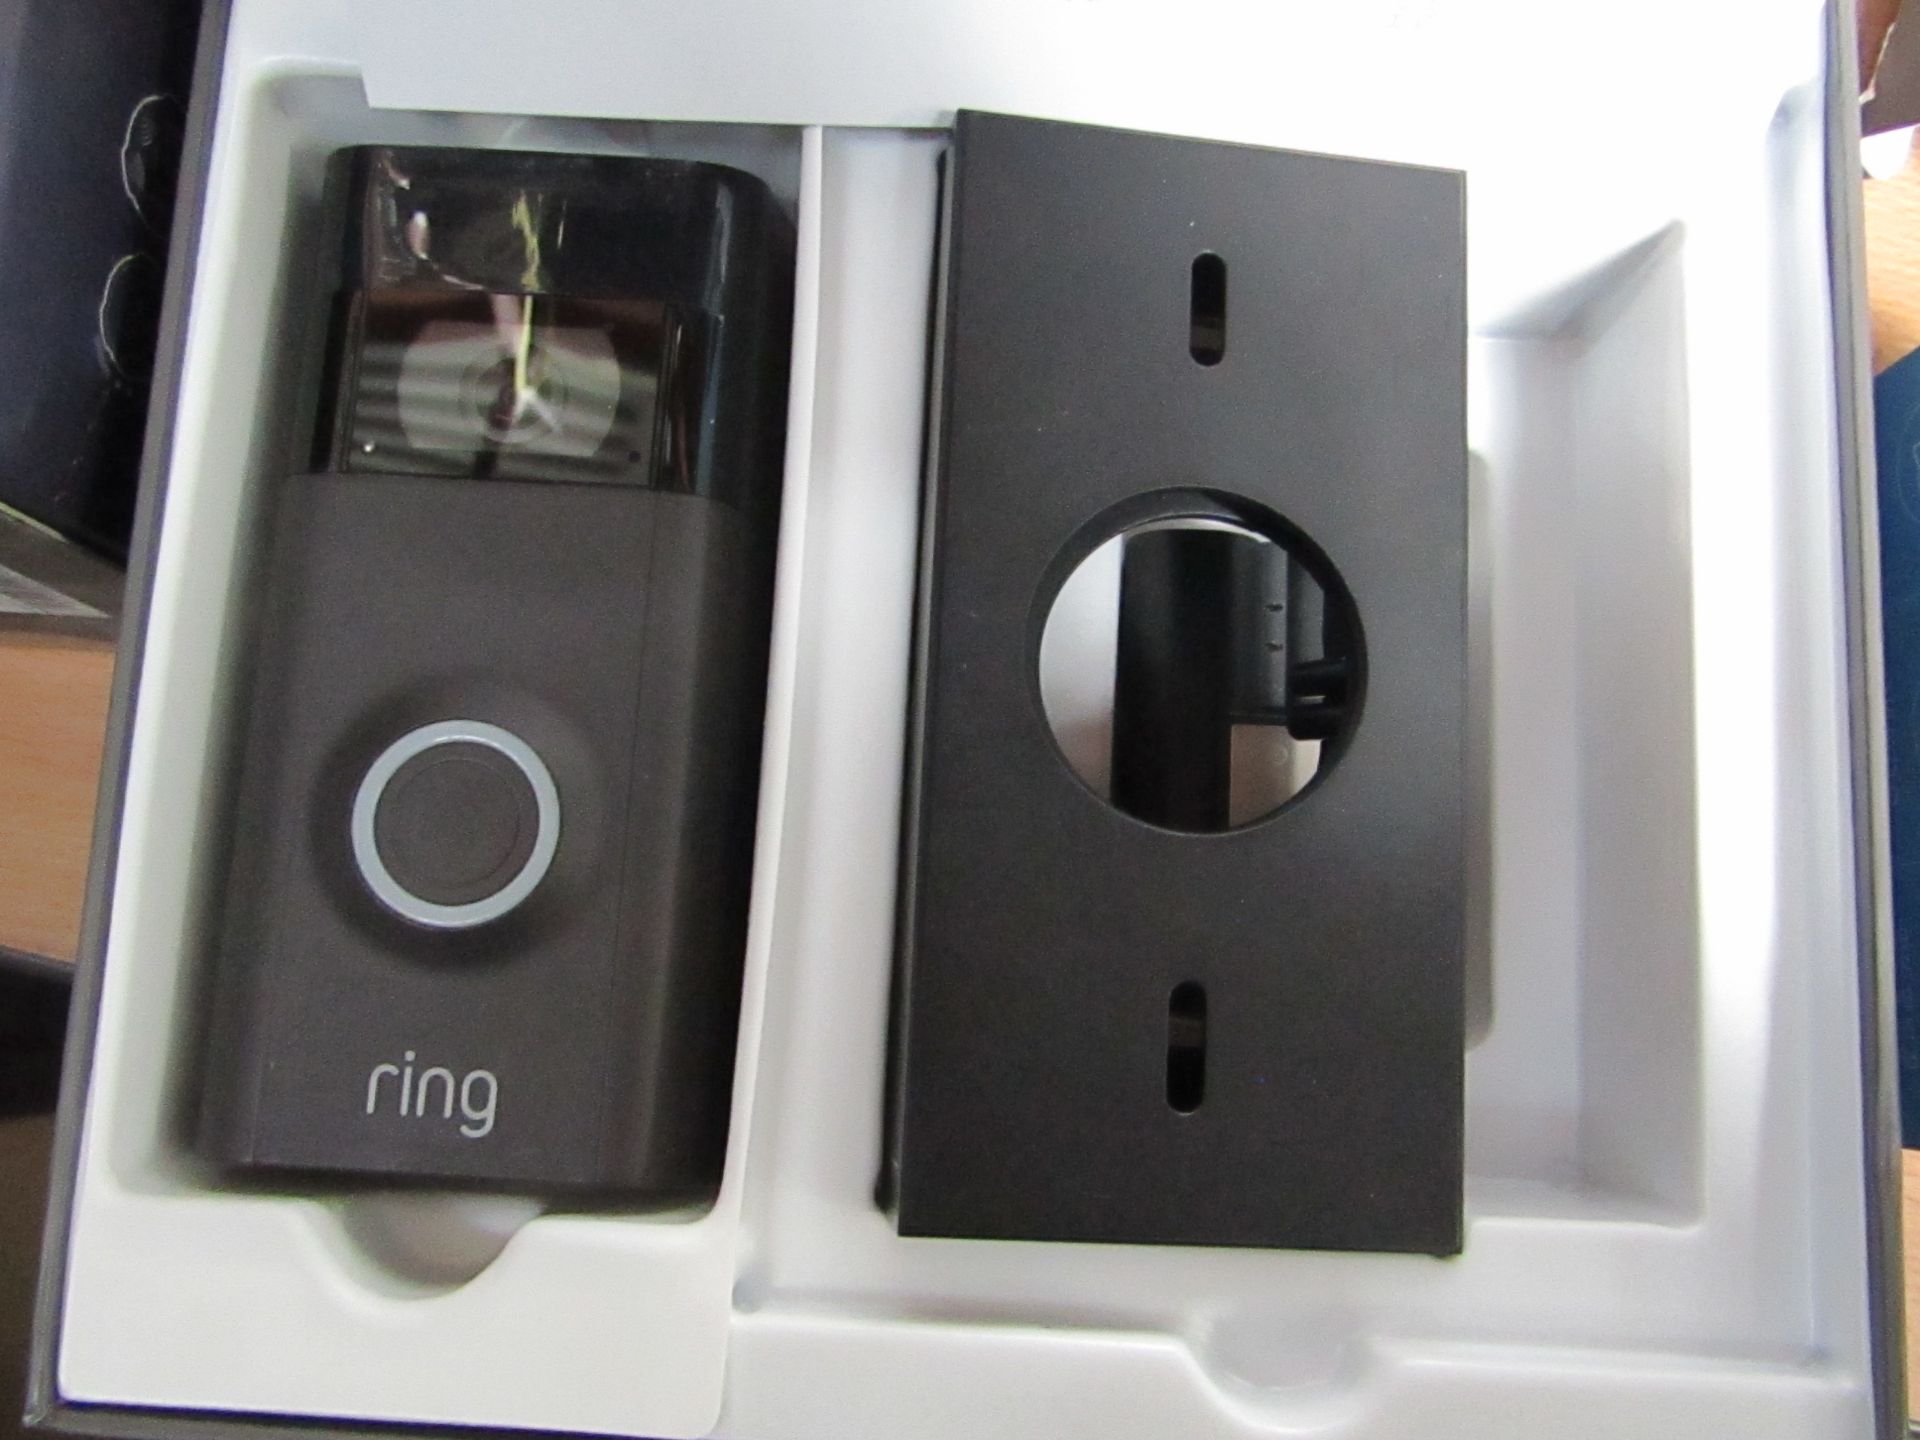 Ring Door Bell 2, comes in the original box with the door bell unit, battery and mounting bracket,